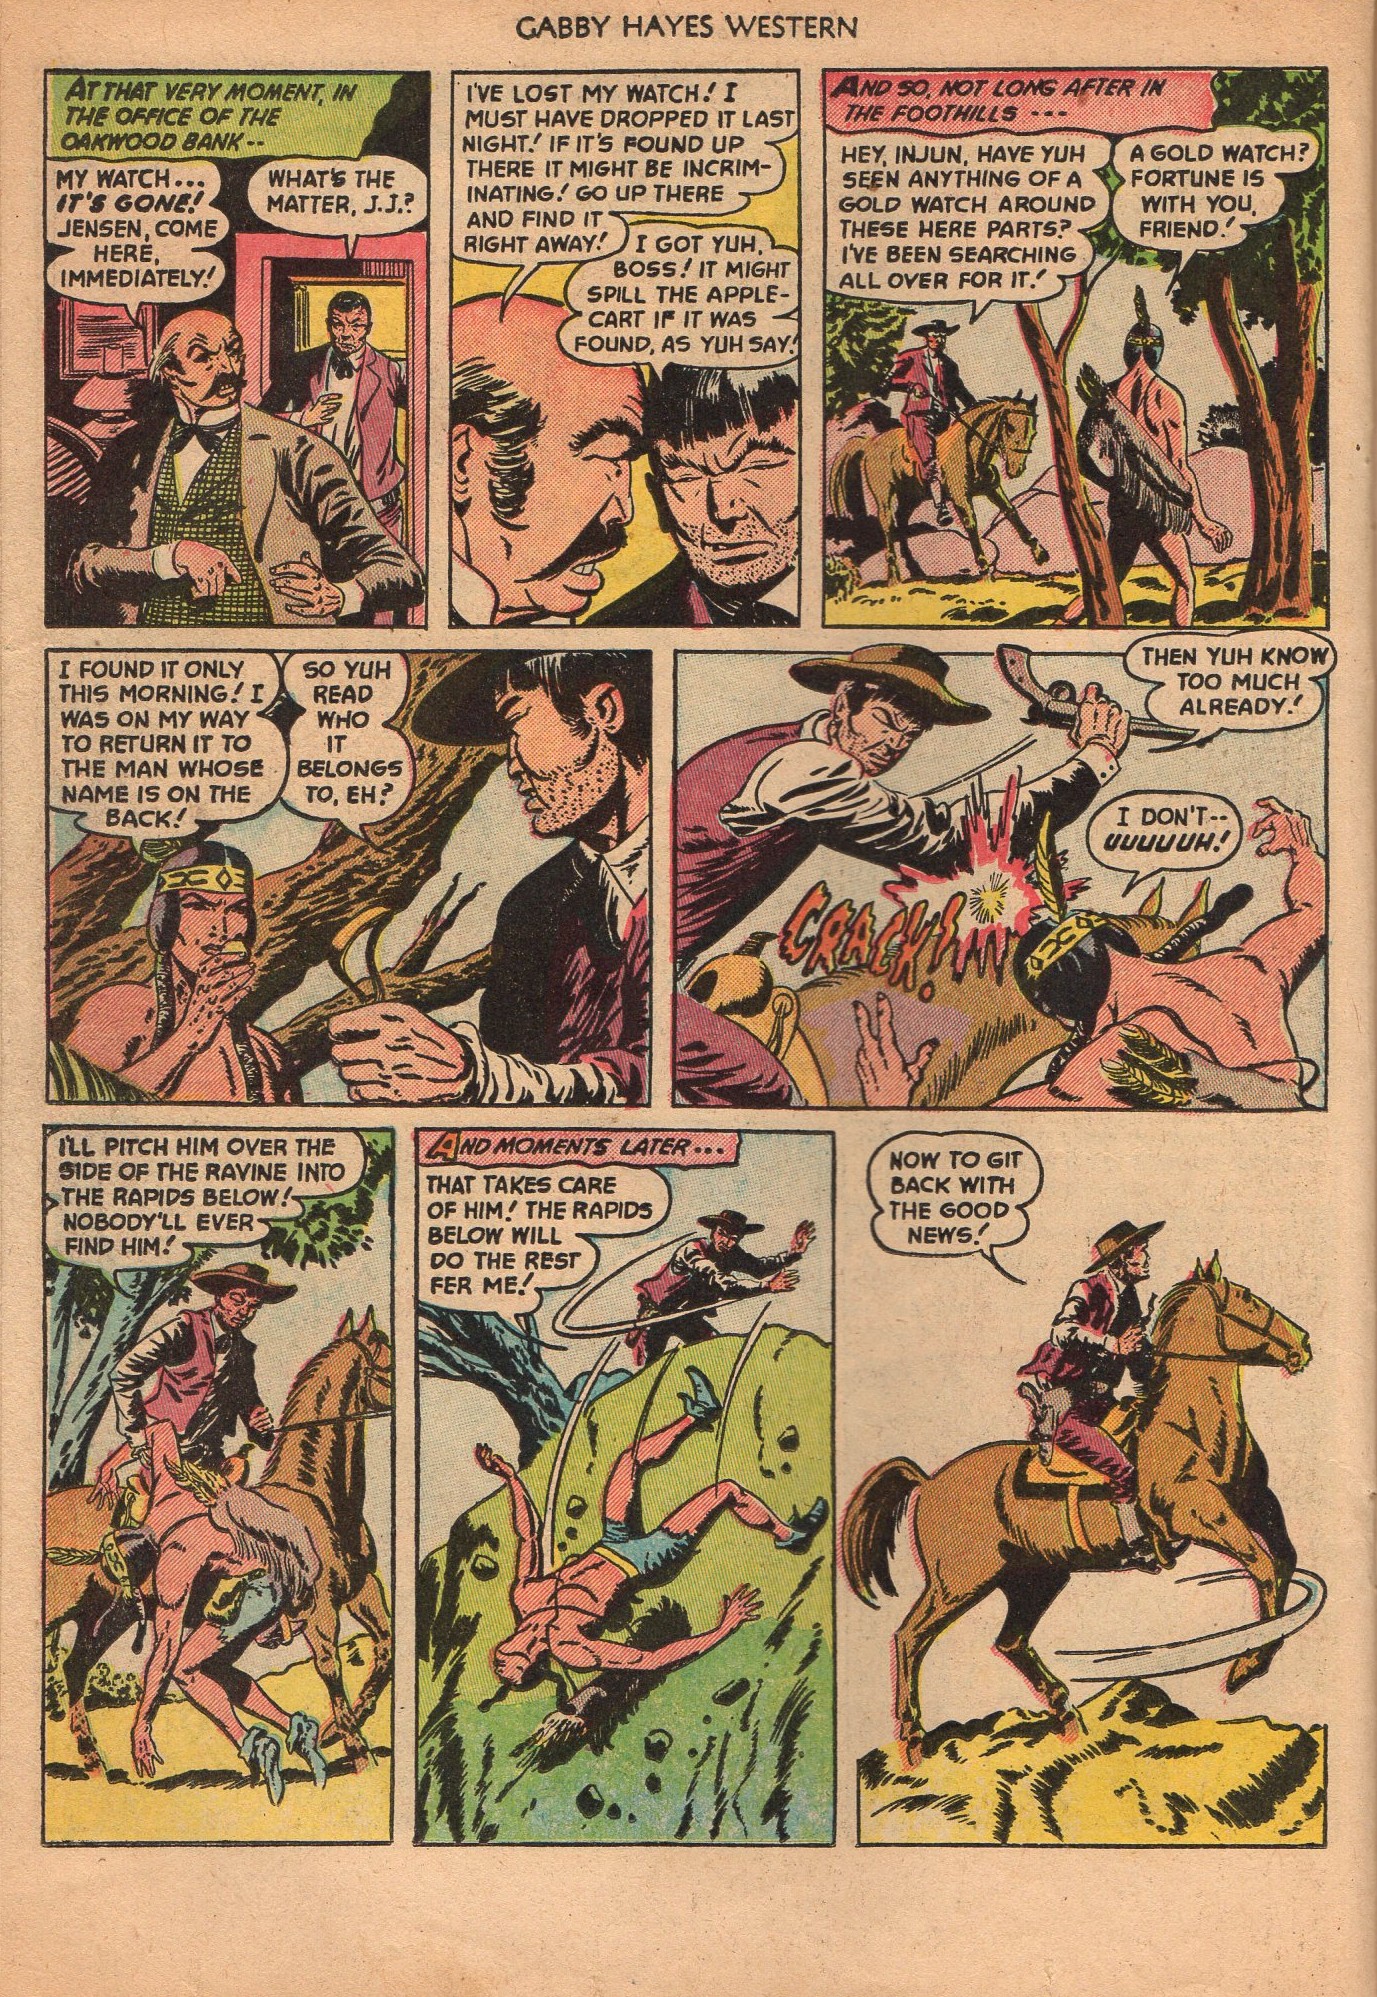 Read online Gabby Hayes Western comic -  Issue #46 - 22